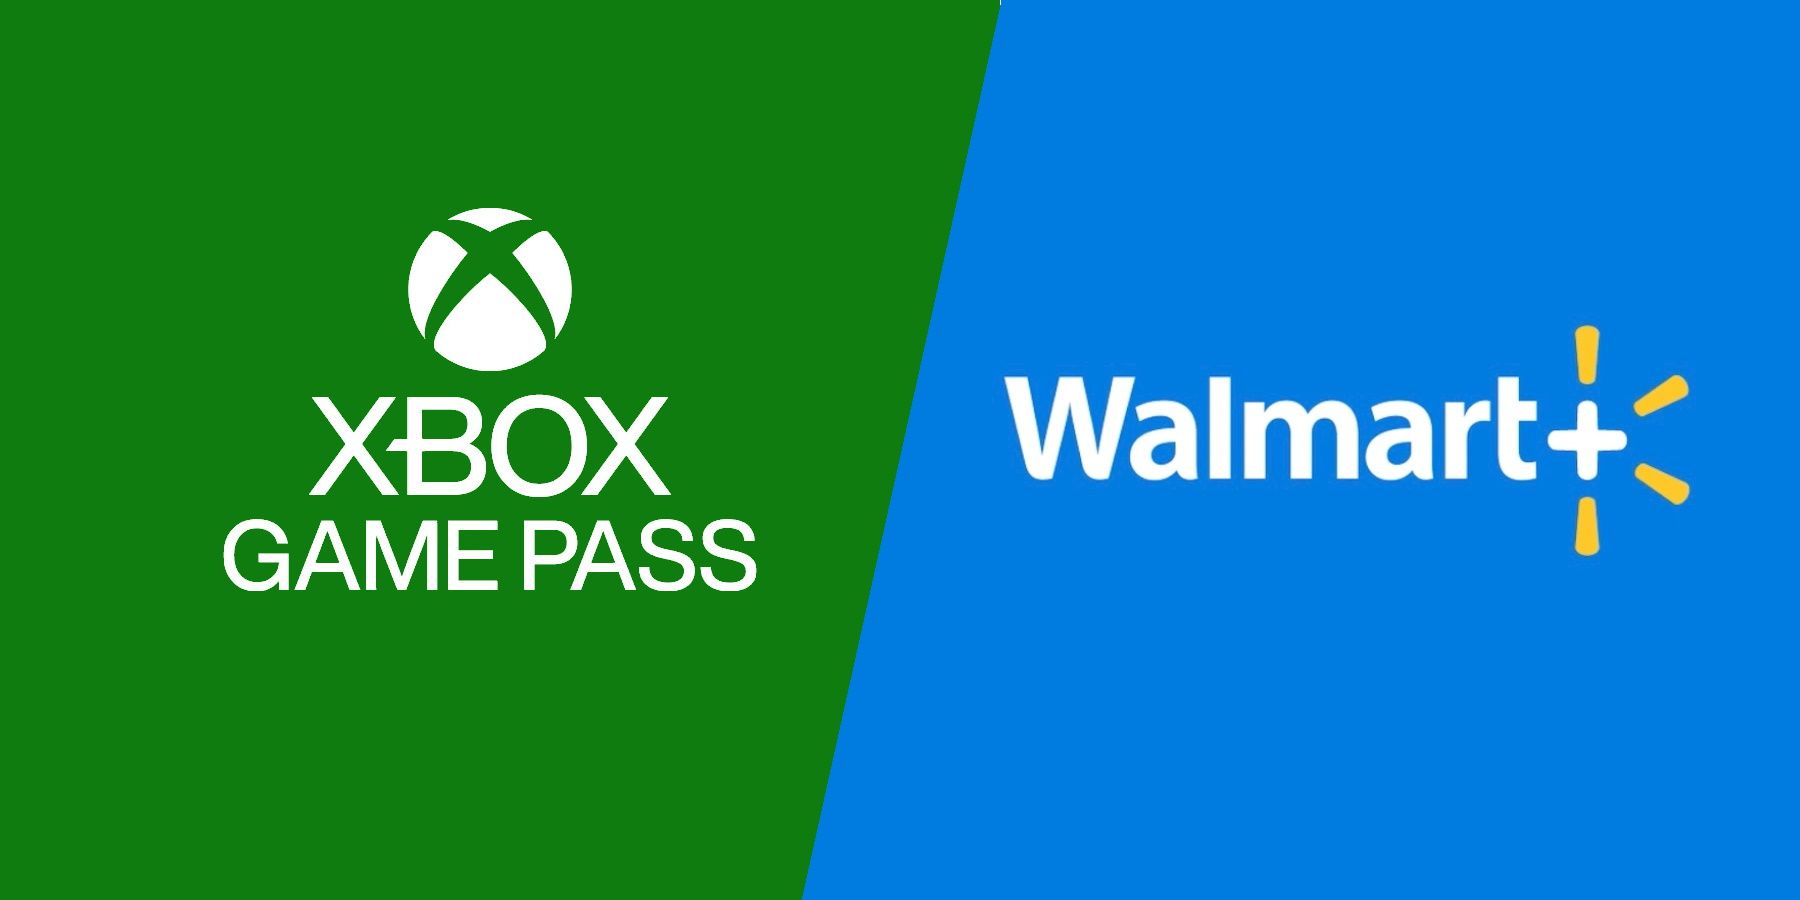 Walmart plus Xbox Game Pass Ultimate Free subscription